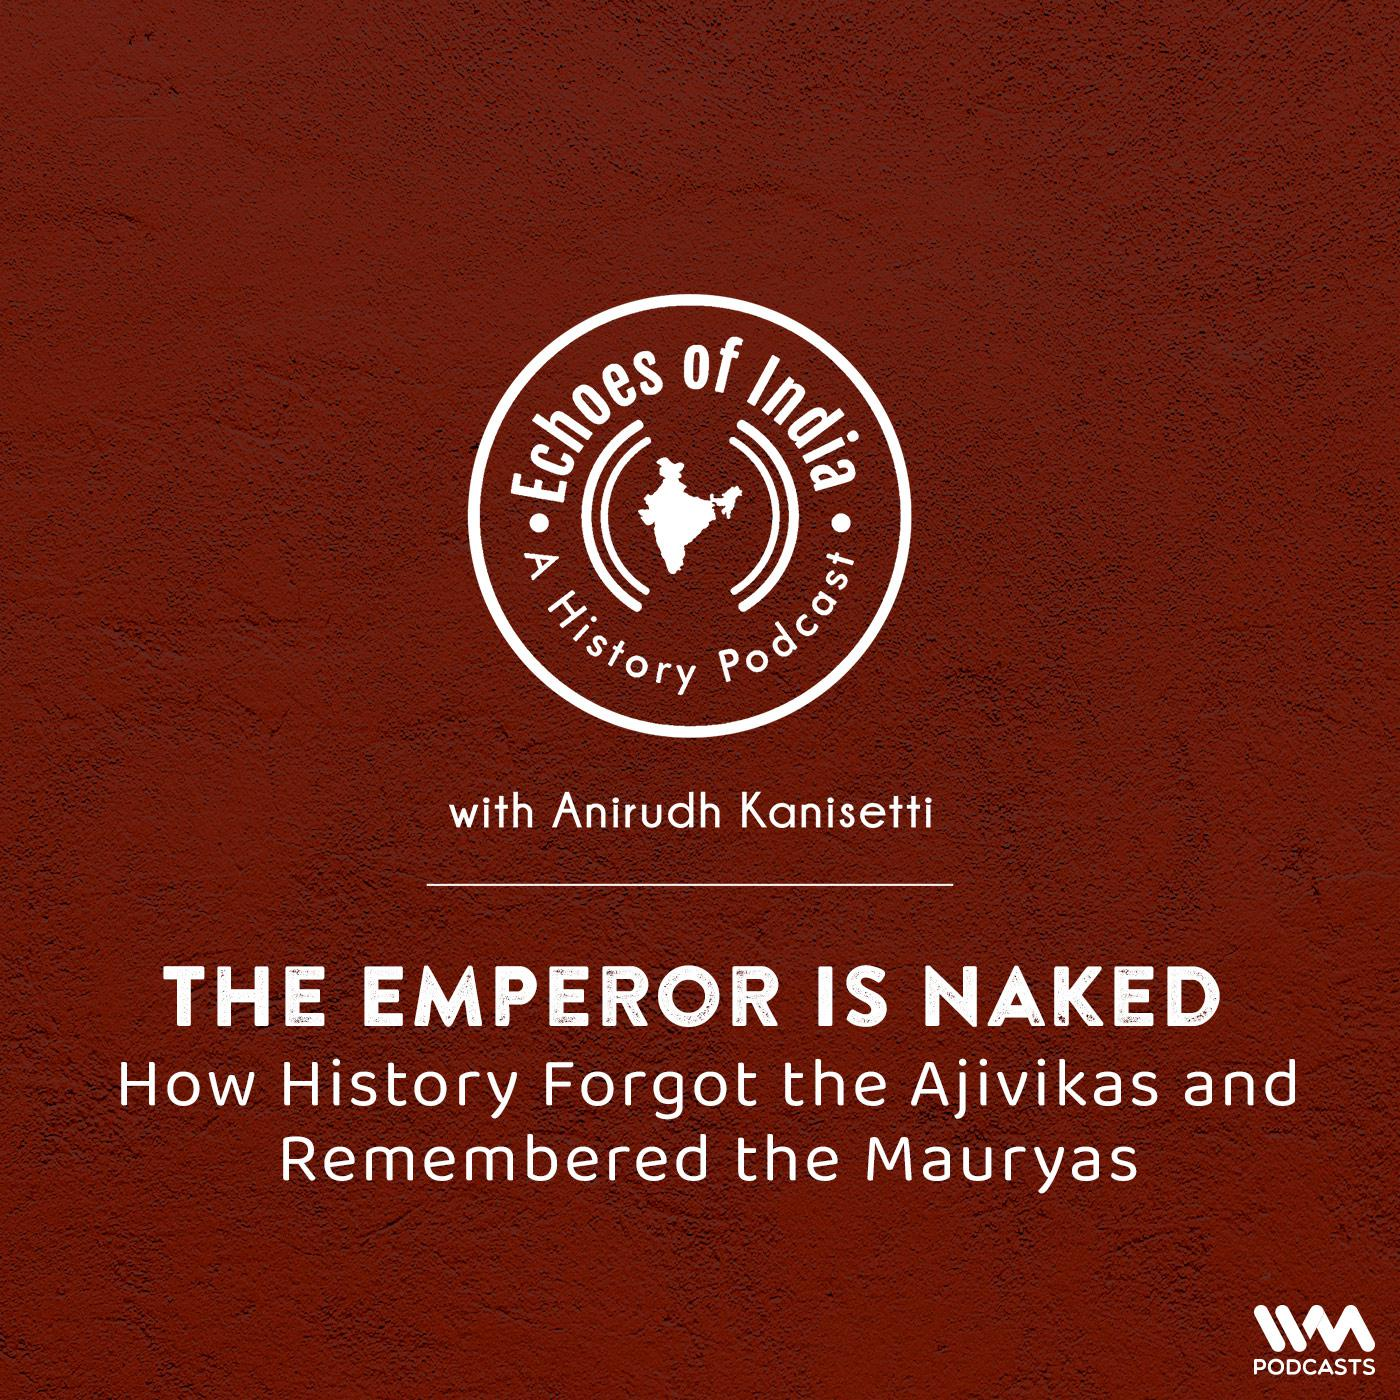 The Emperor is Naked: How History Forgot the Ajivikas and Remembered the Mauryas